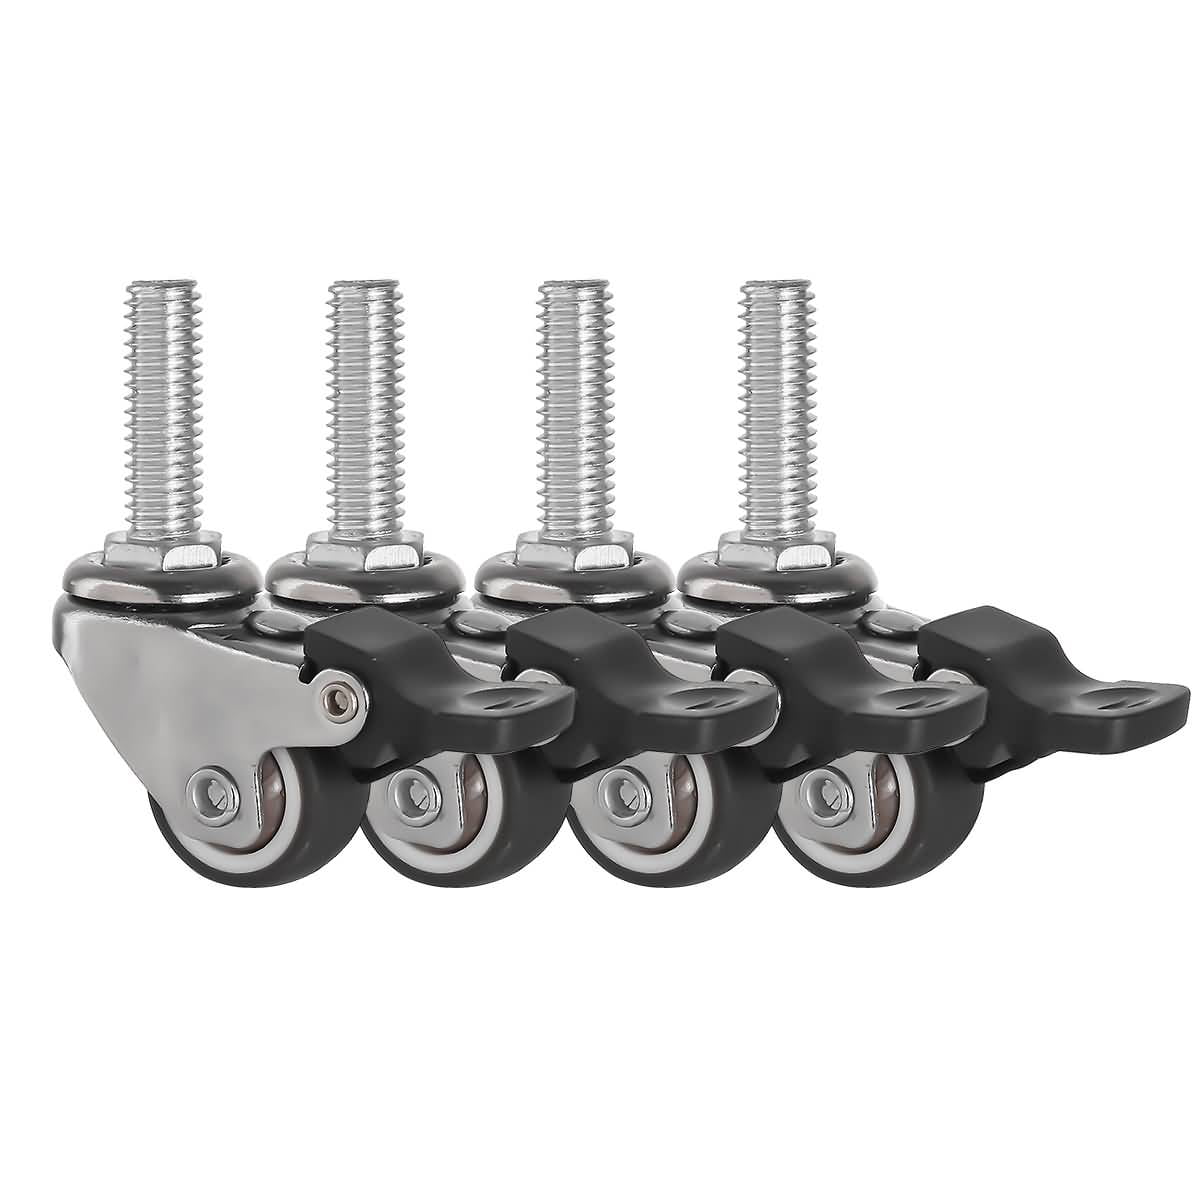 Details about   4 Pack 1 Inch Stem Caster Wheel Swivel with Brake Grey Rubber Caster Wheels 